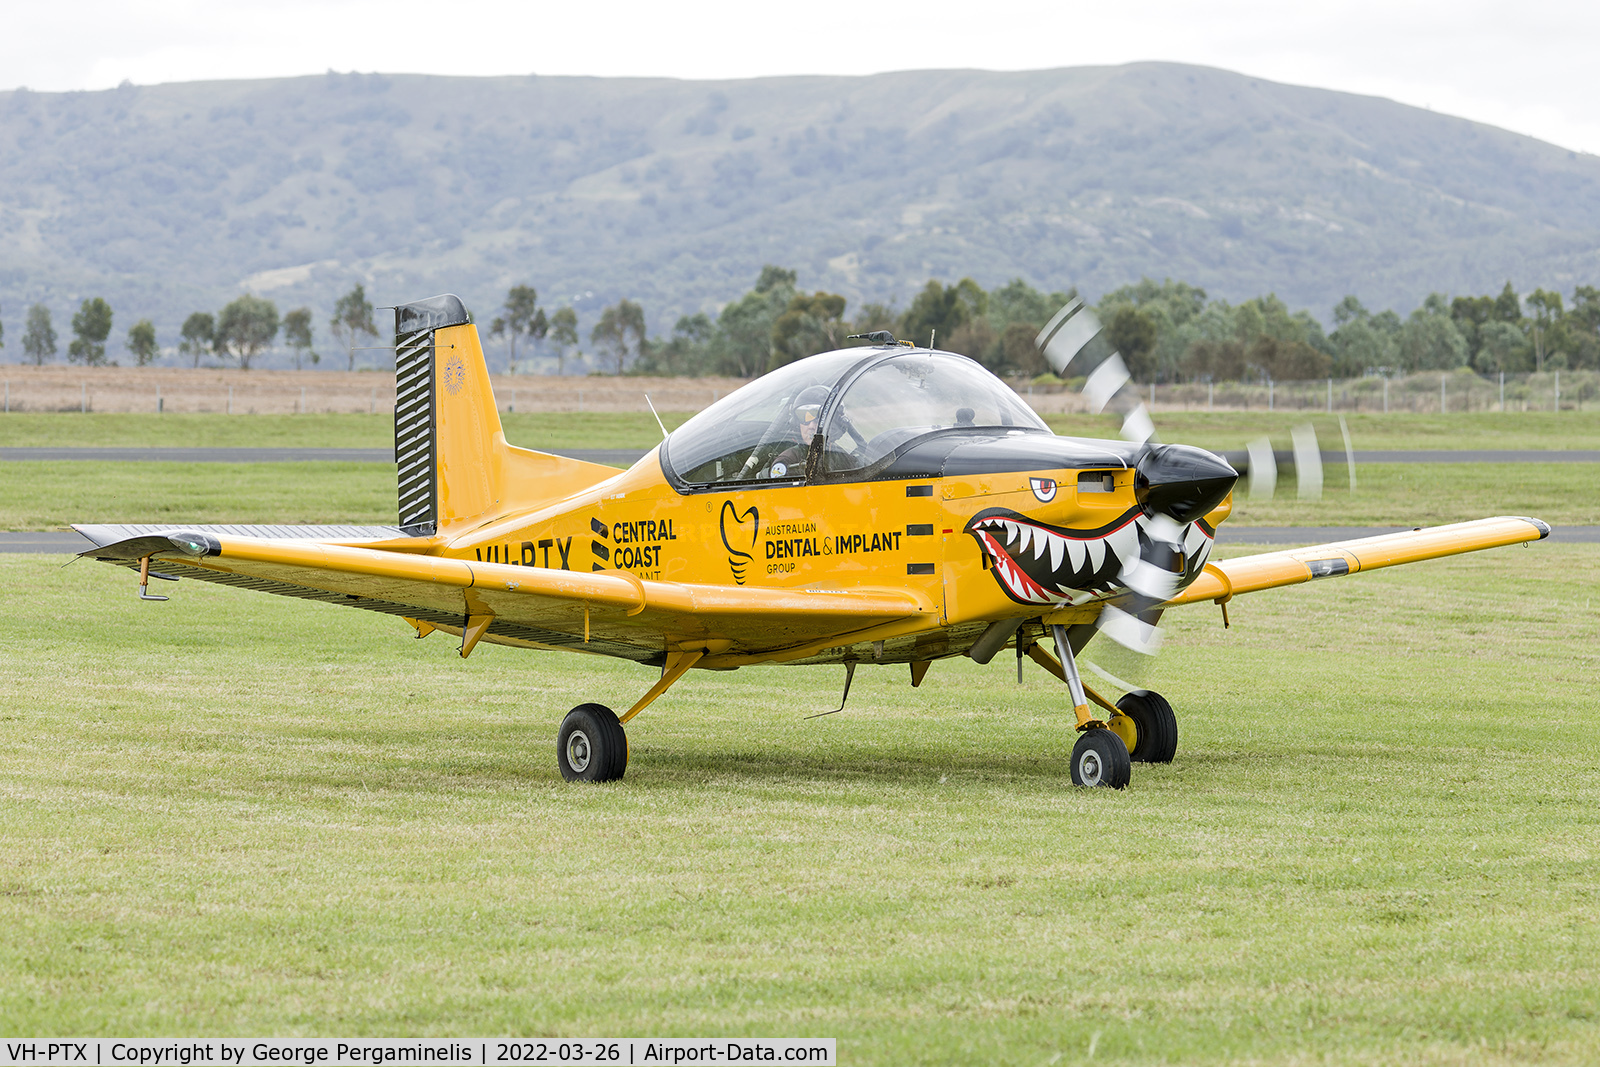 VH-PTX, 1999 Pacific Aerospace CT/4E Airtrainer C/N 208, Warbirds Over Scone 2022